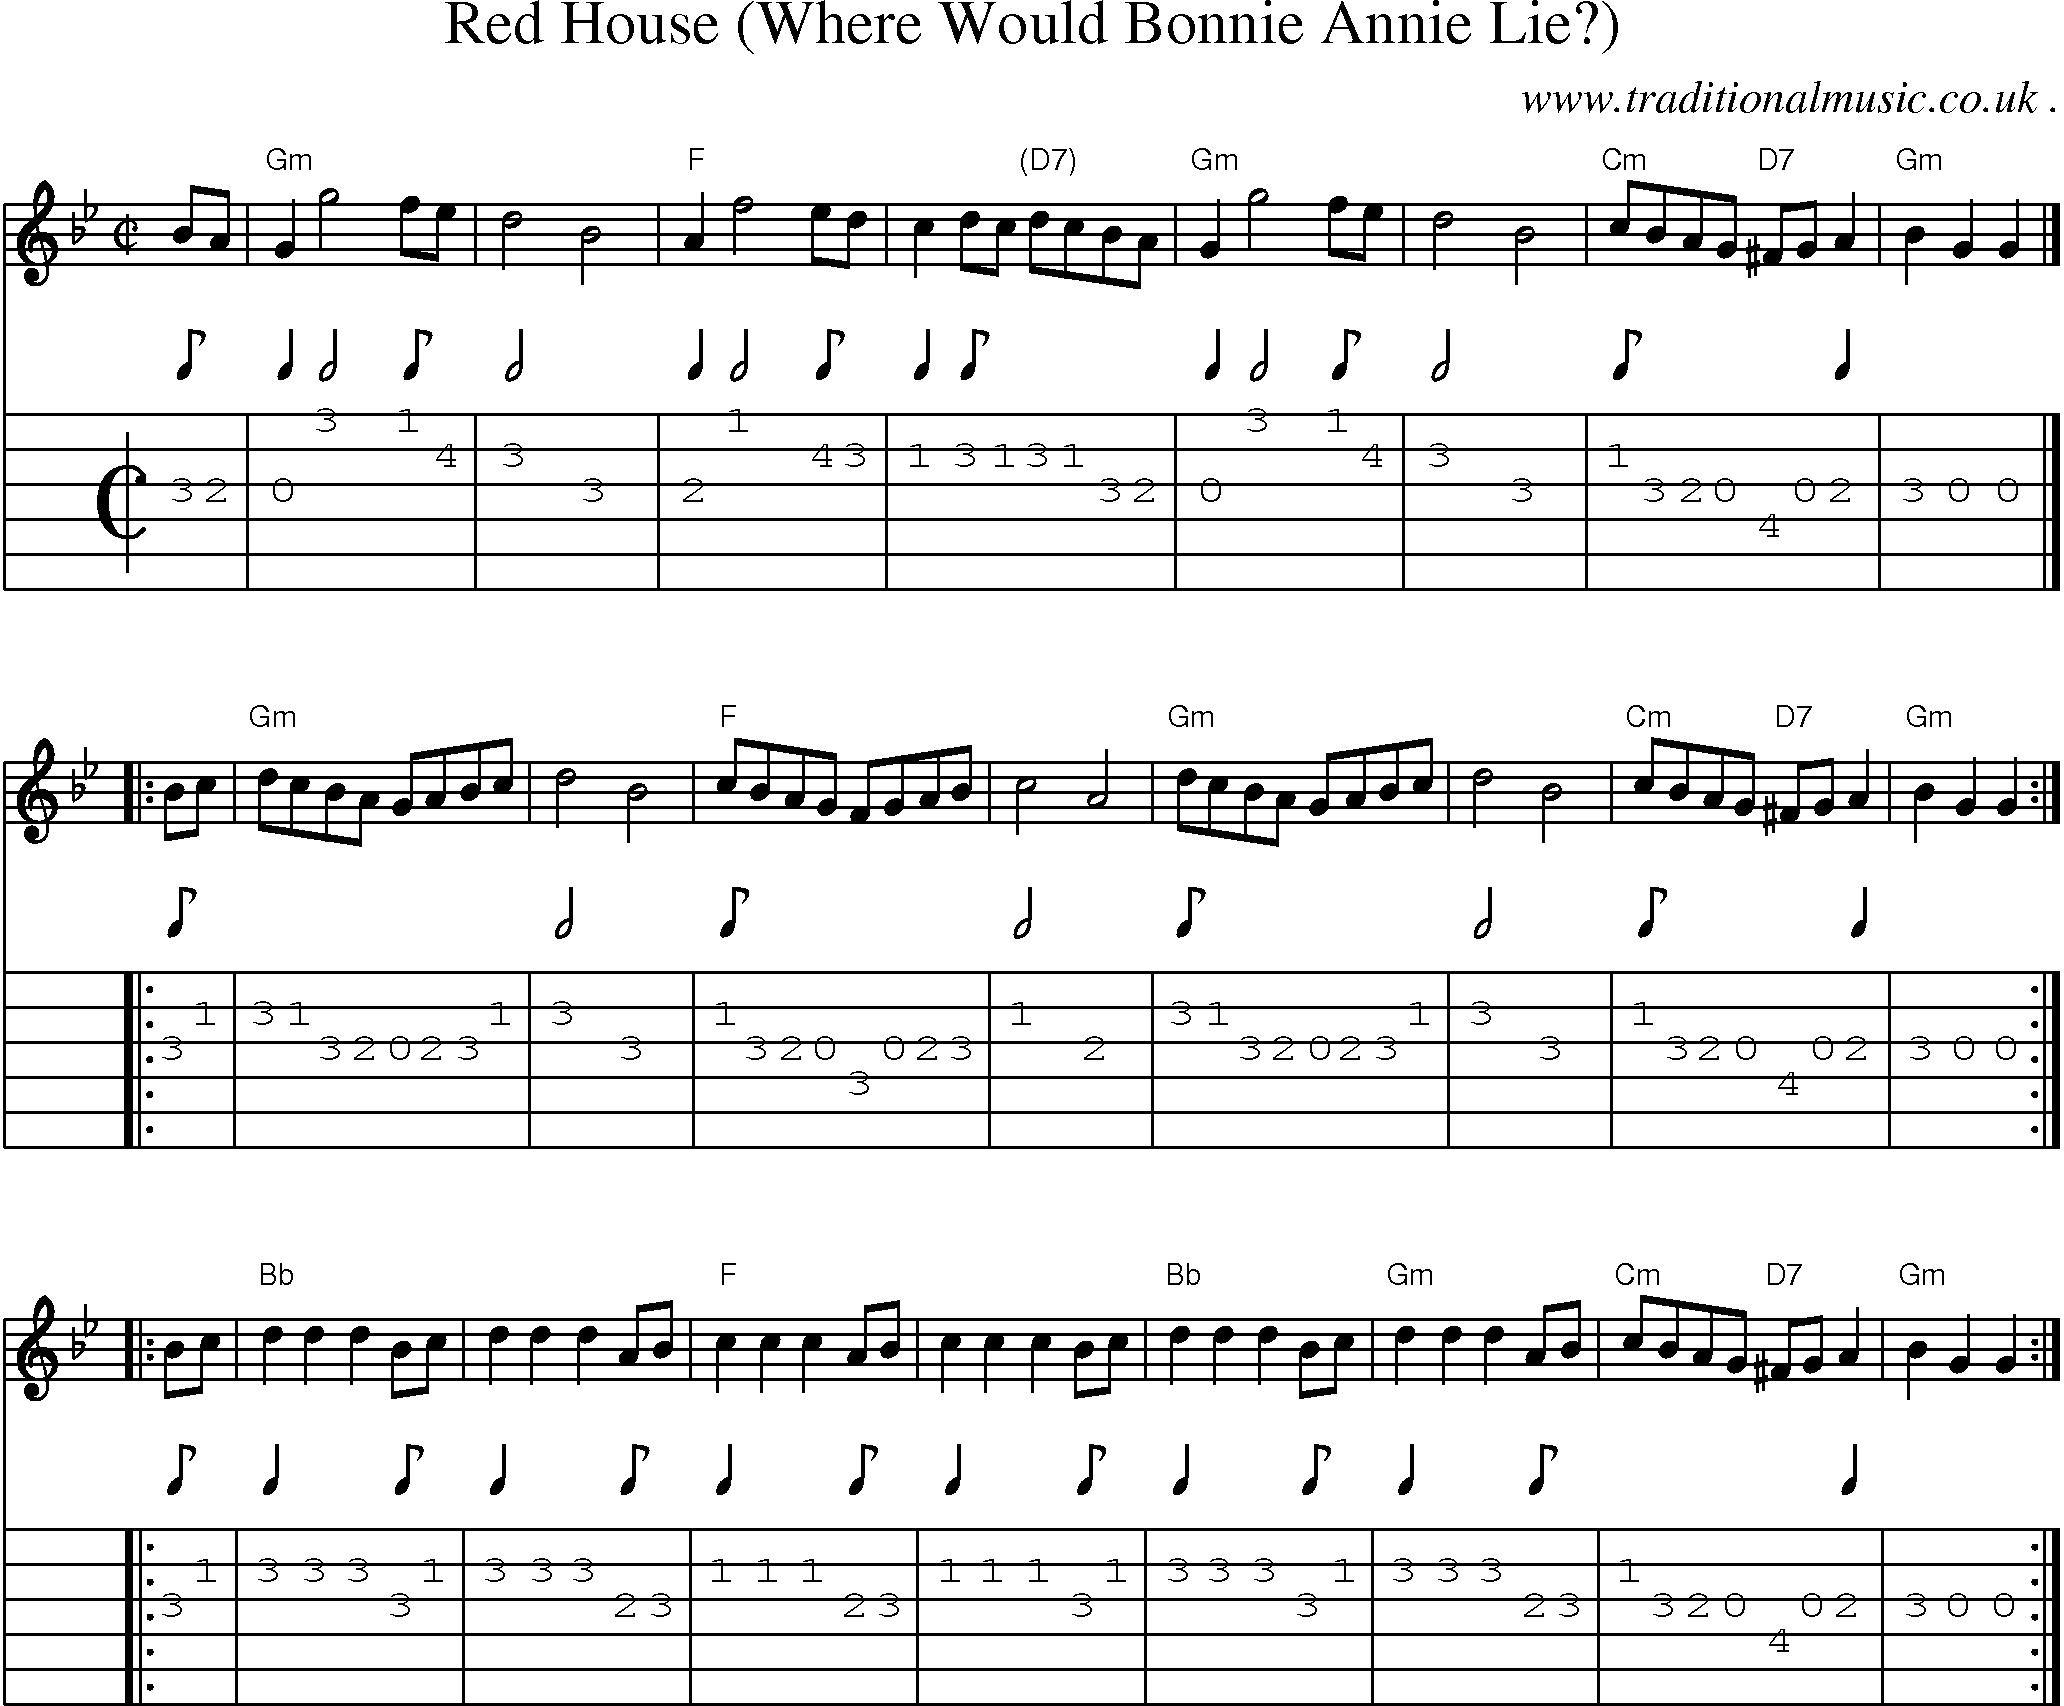 Sheet-music  score, Chords and Guitar Tabs for Red House Where Would Bonnie Annie Lie